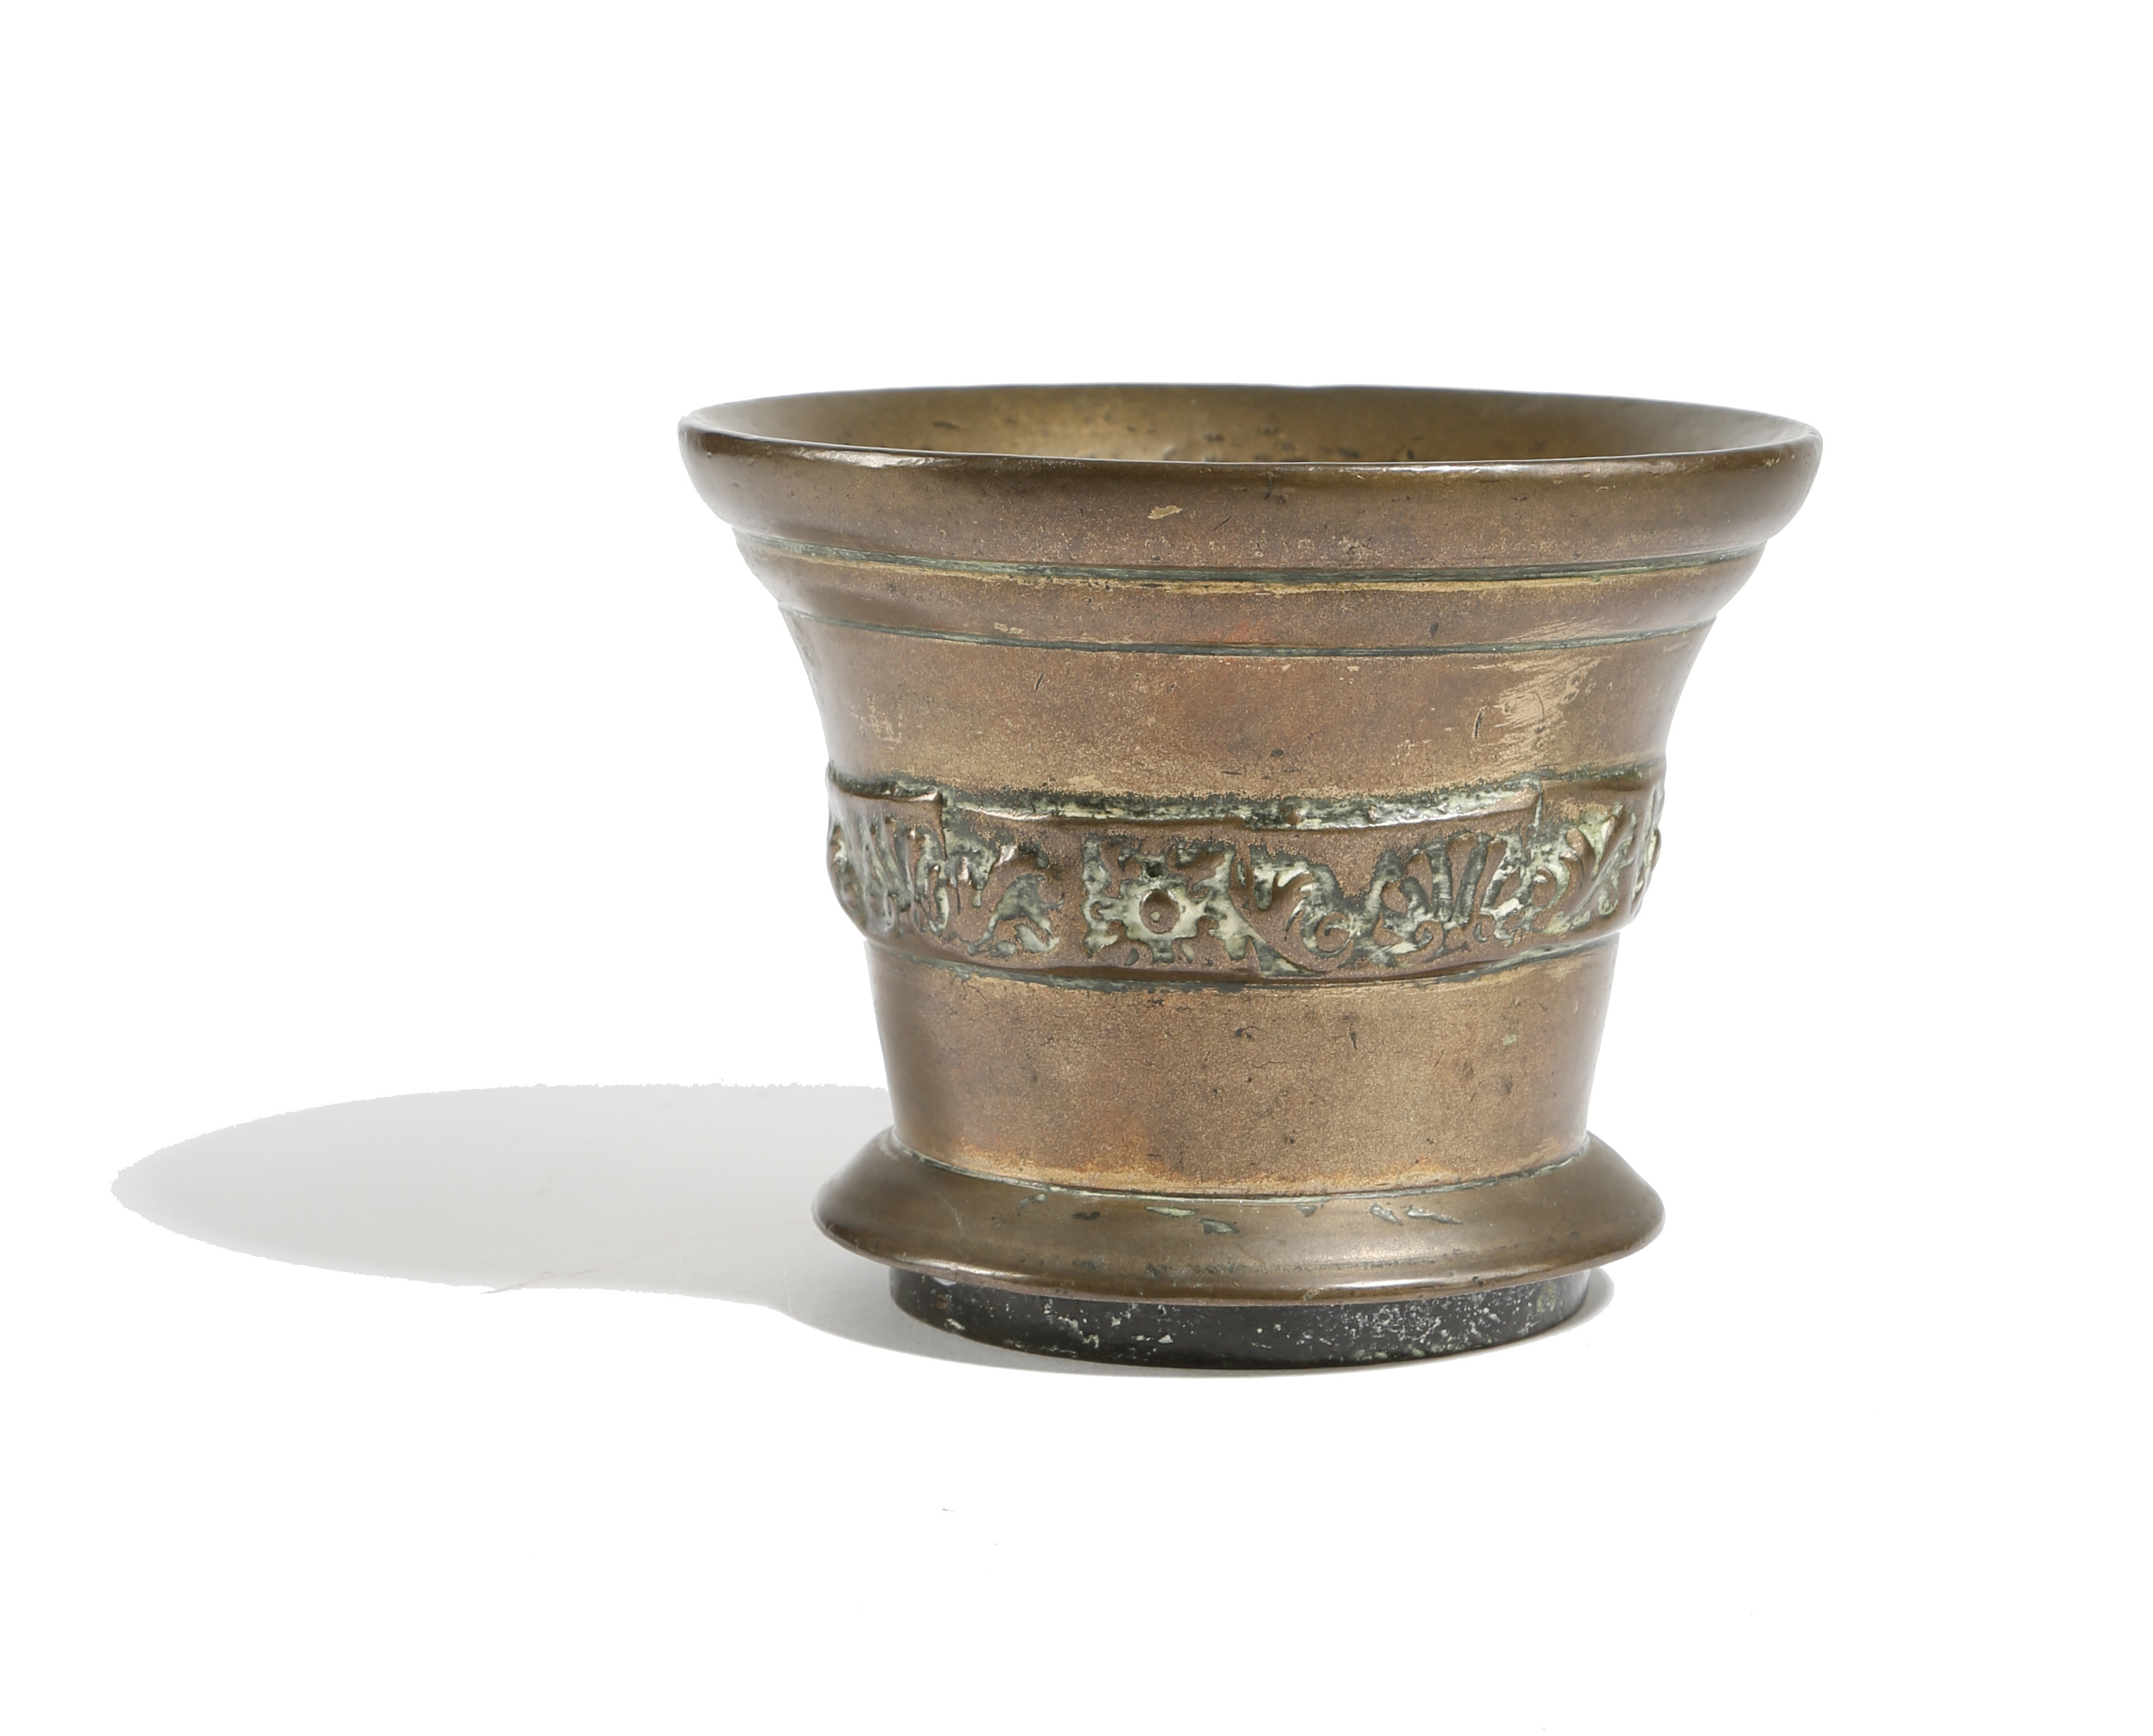 ENGLISH DECORATED BRONZE MORTAR AND THEIR MAKERS by Michael Finlay 